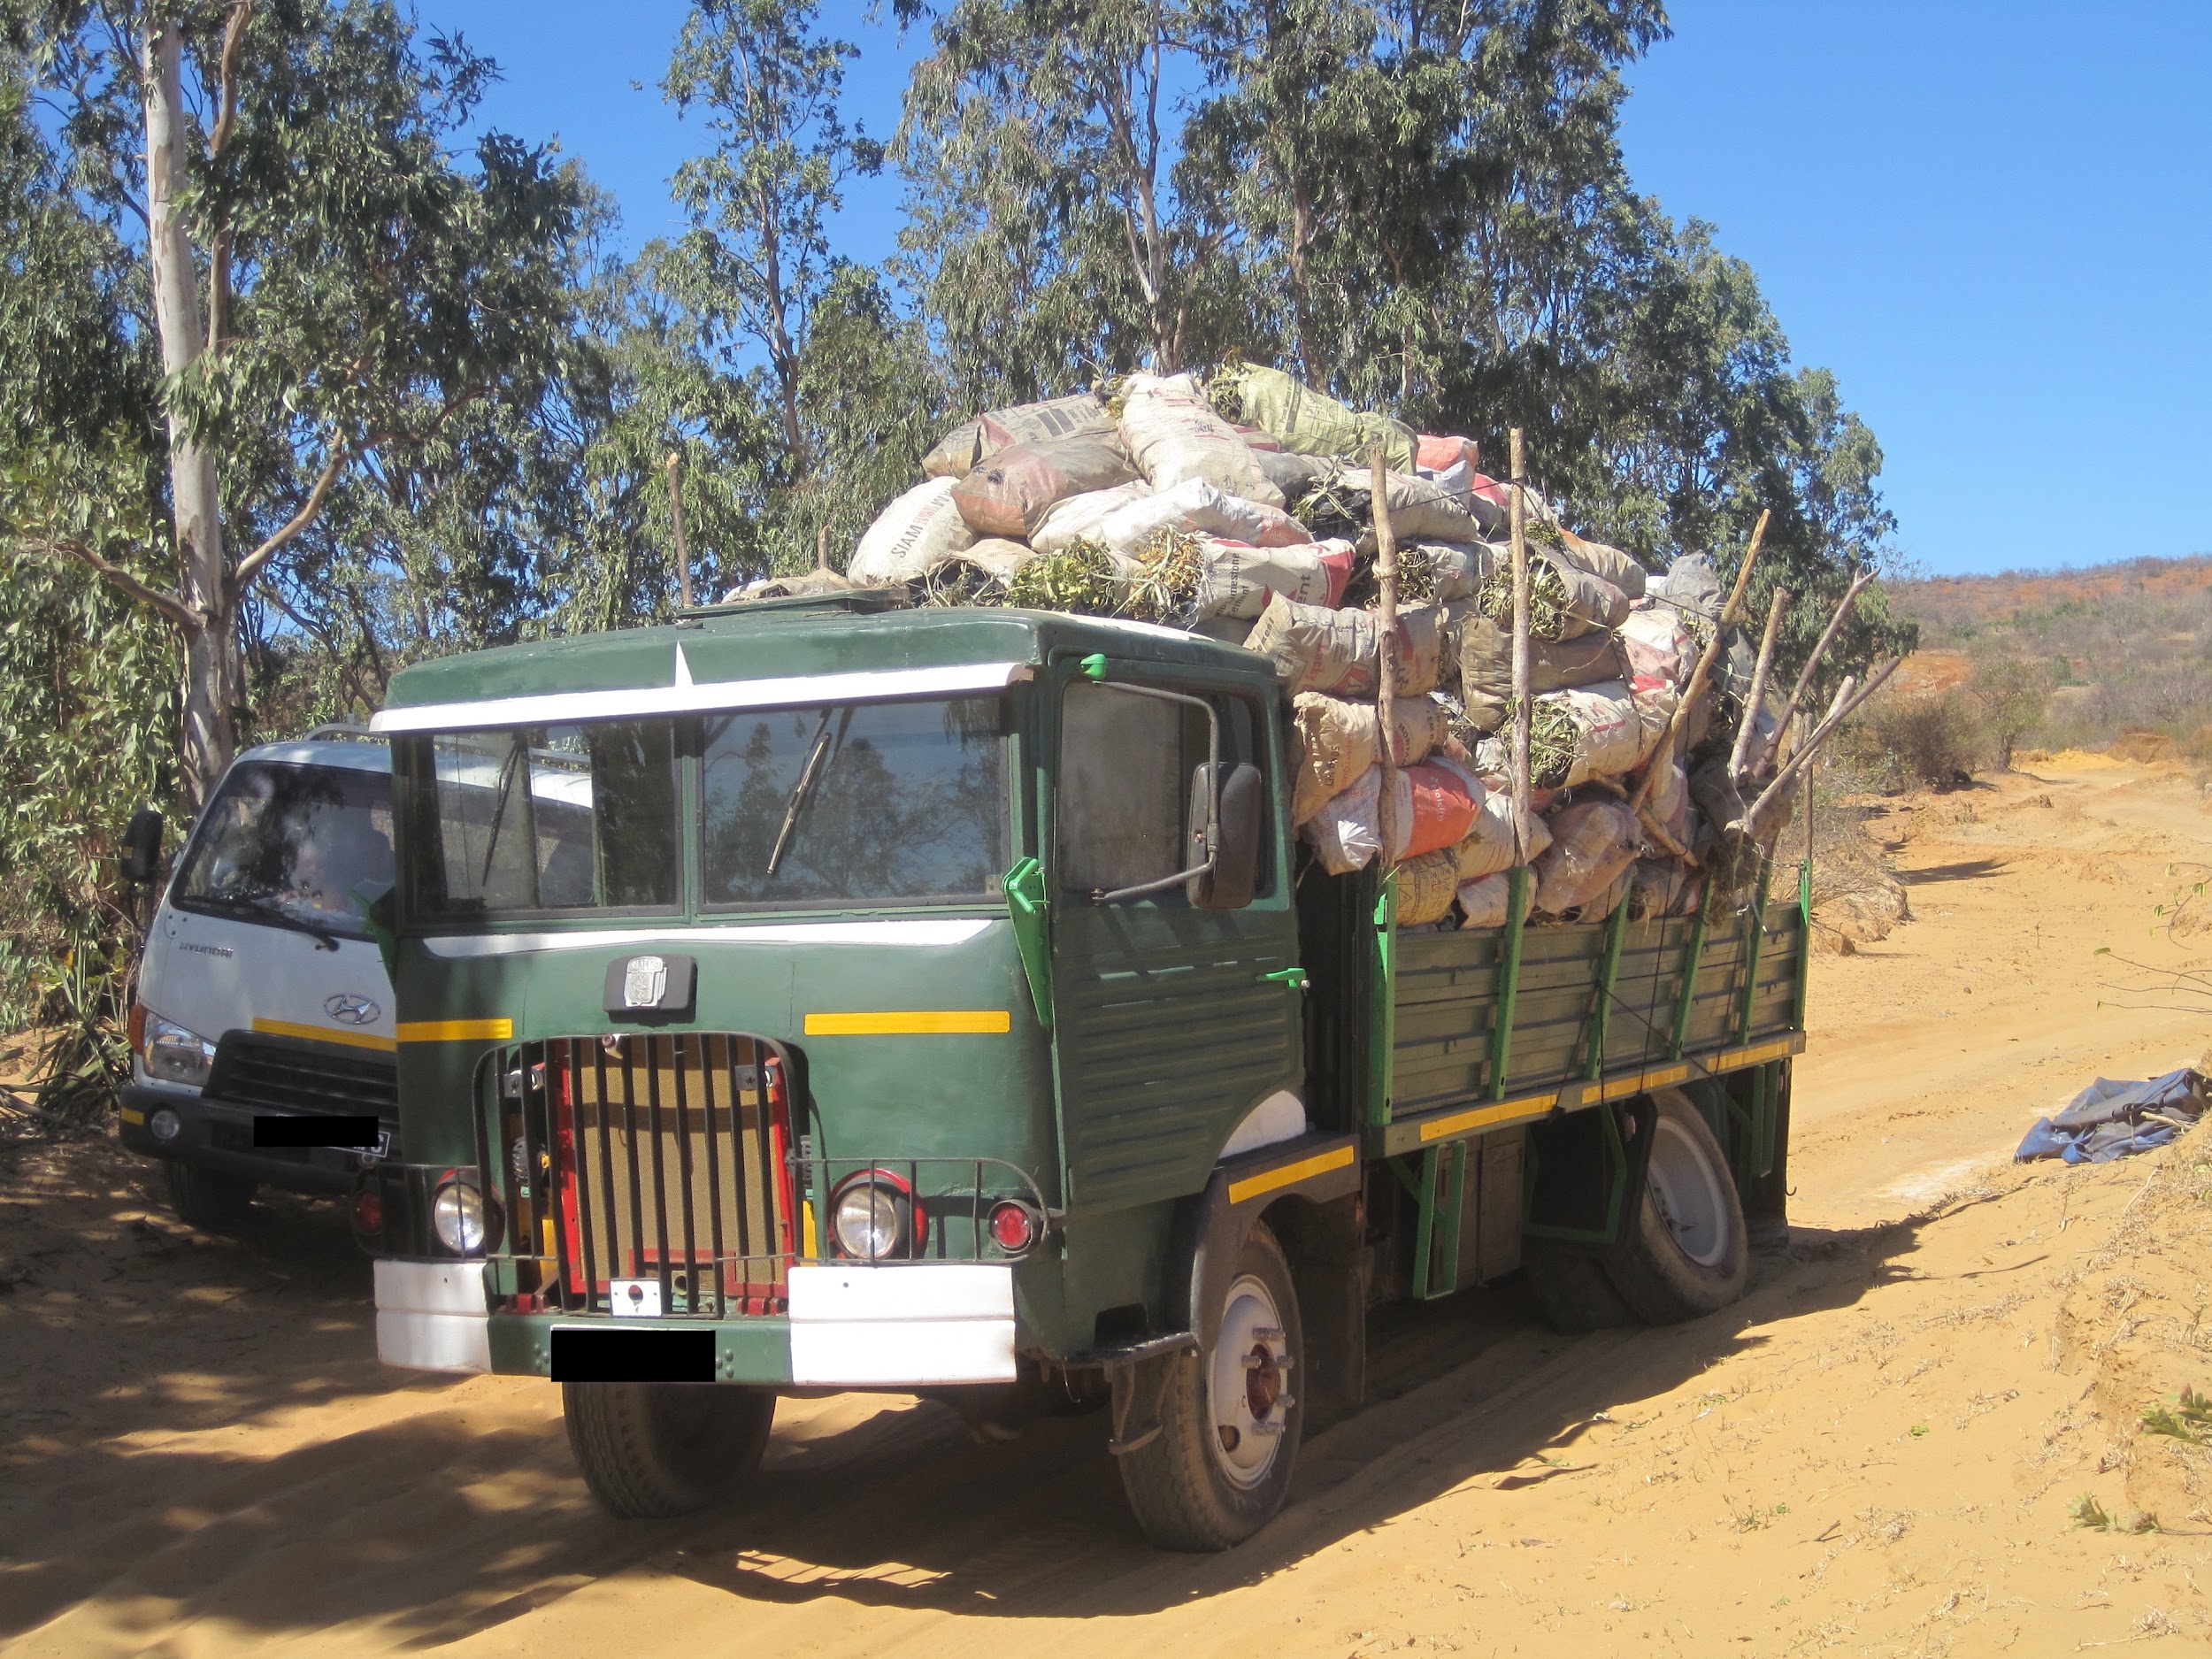 A truck on a dirt road with bags of charcoal in its bed.